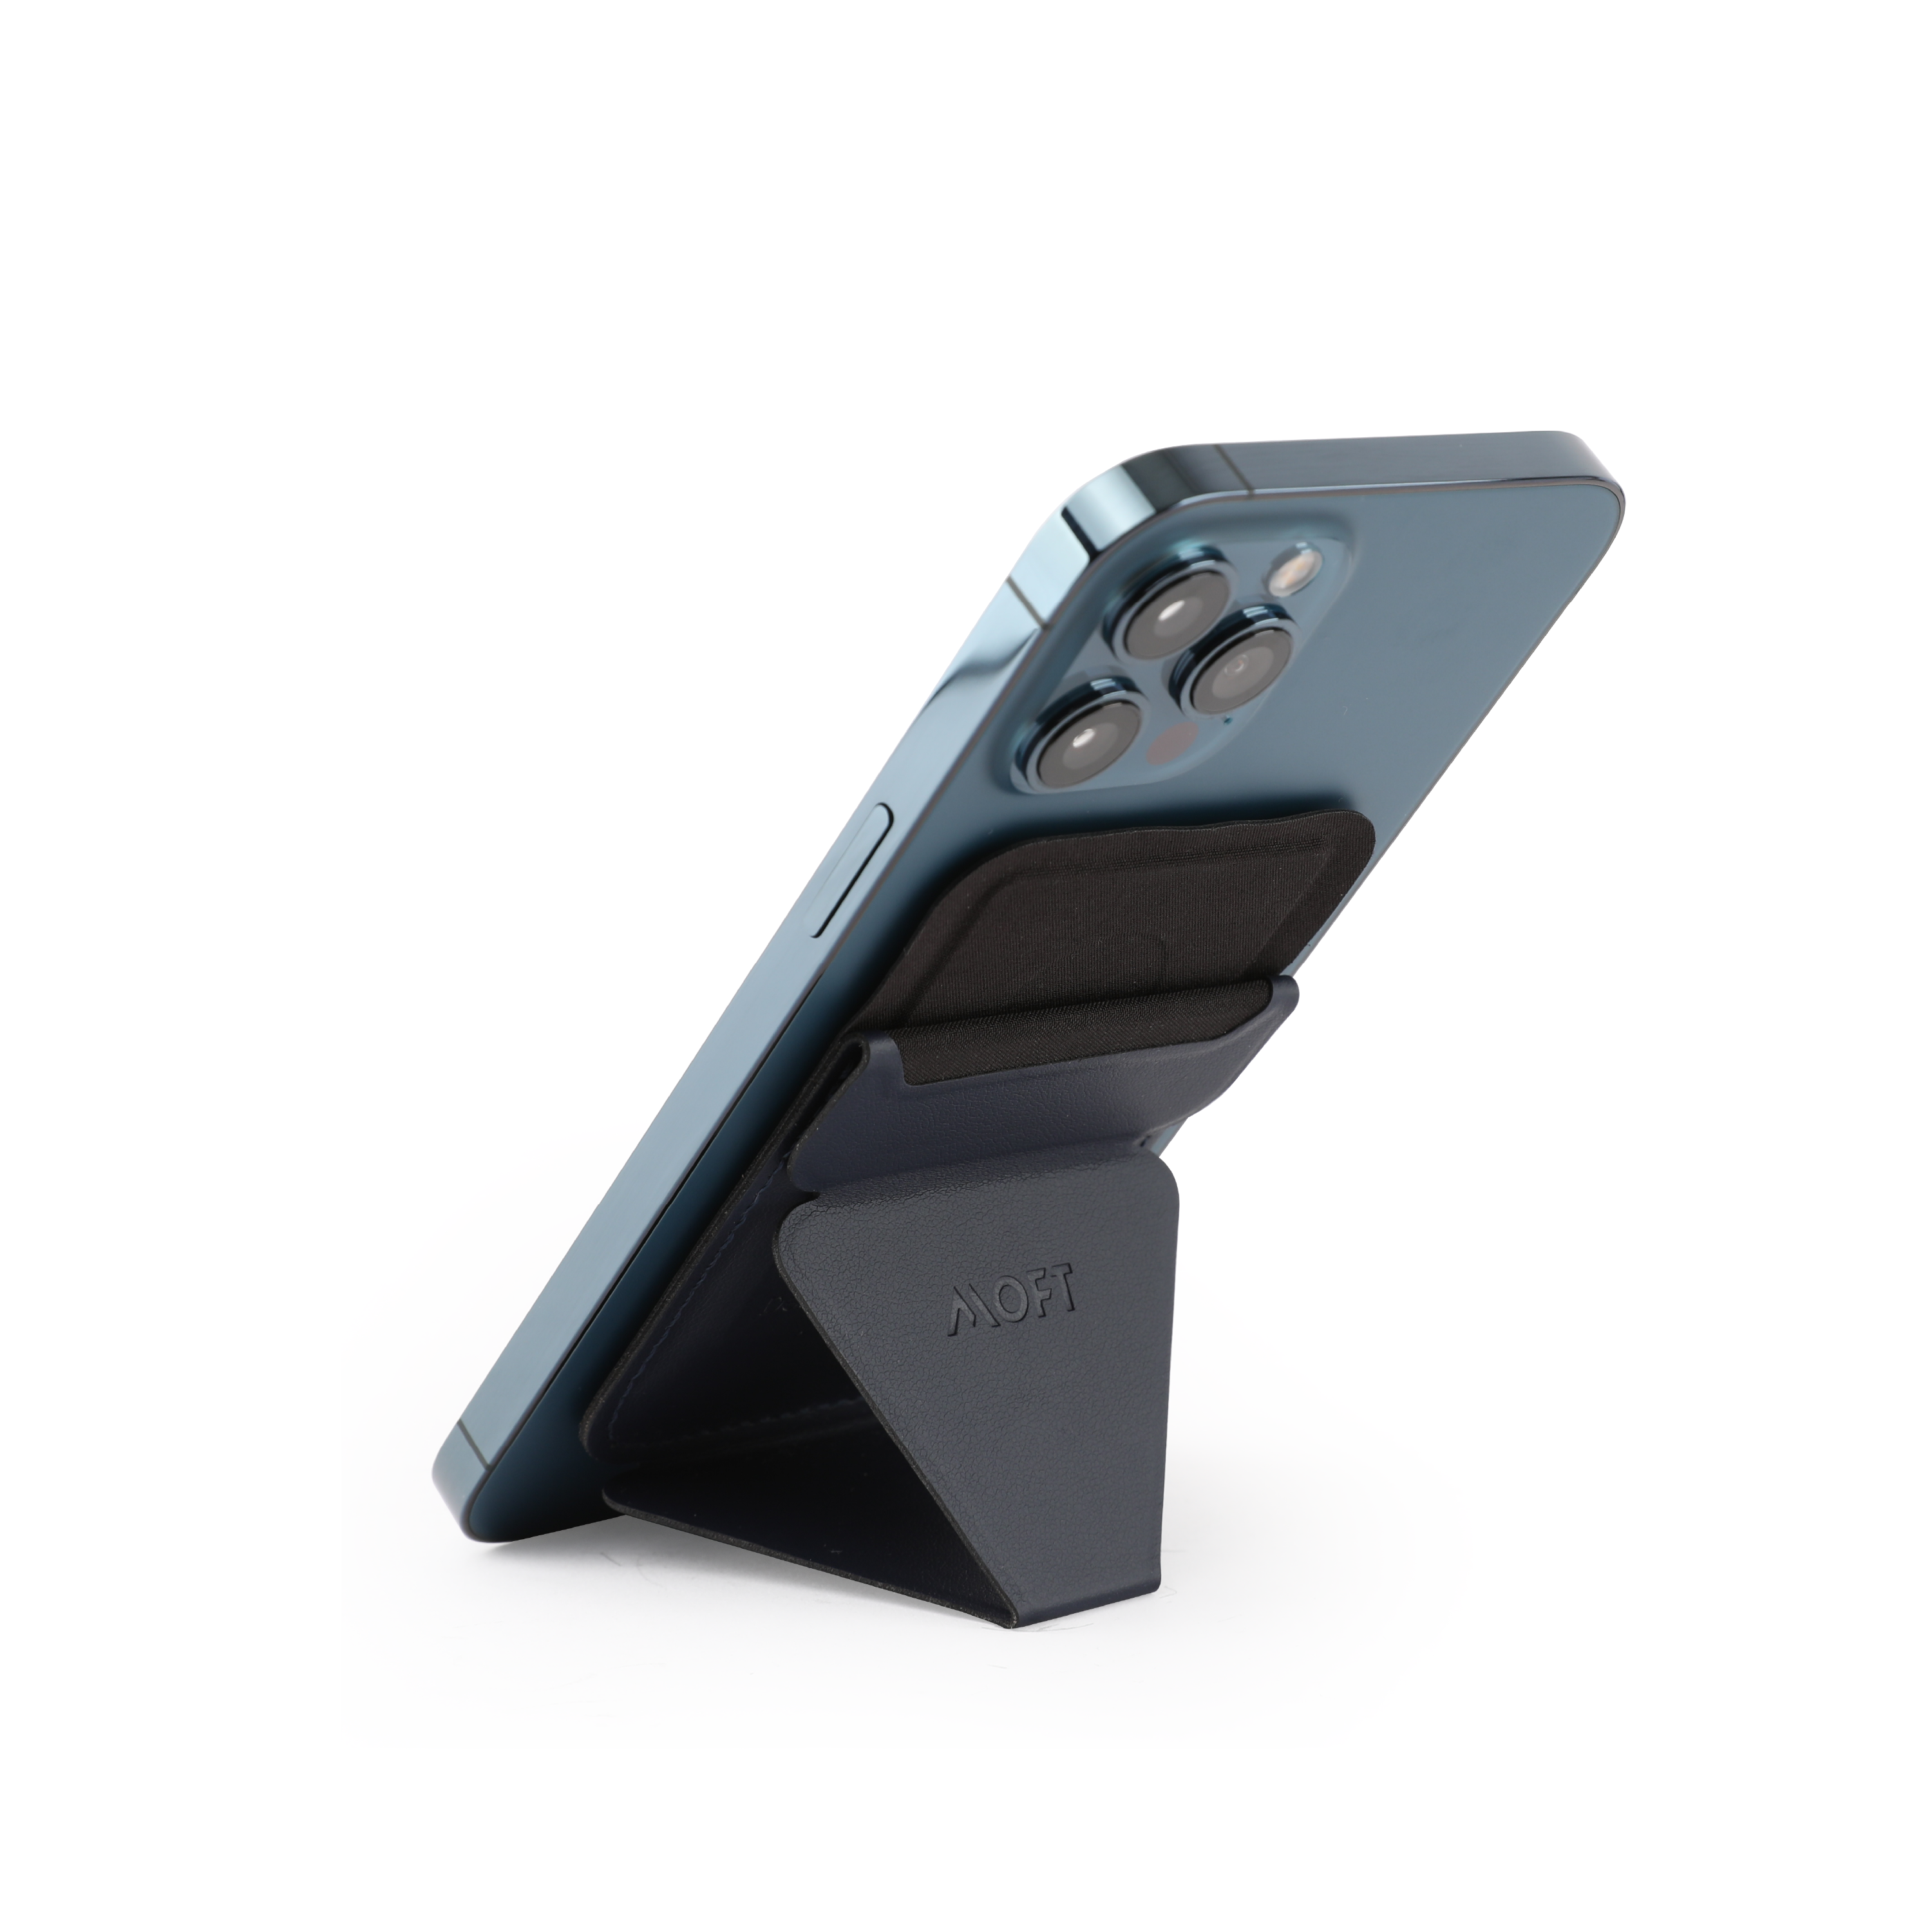 Hands on with Moft's folding iPhone stands and MagSafe battery